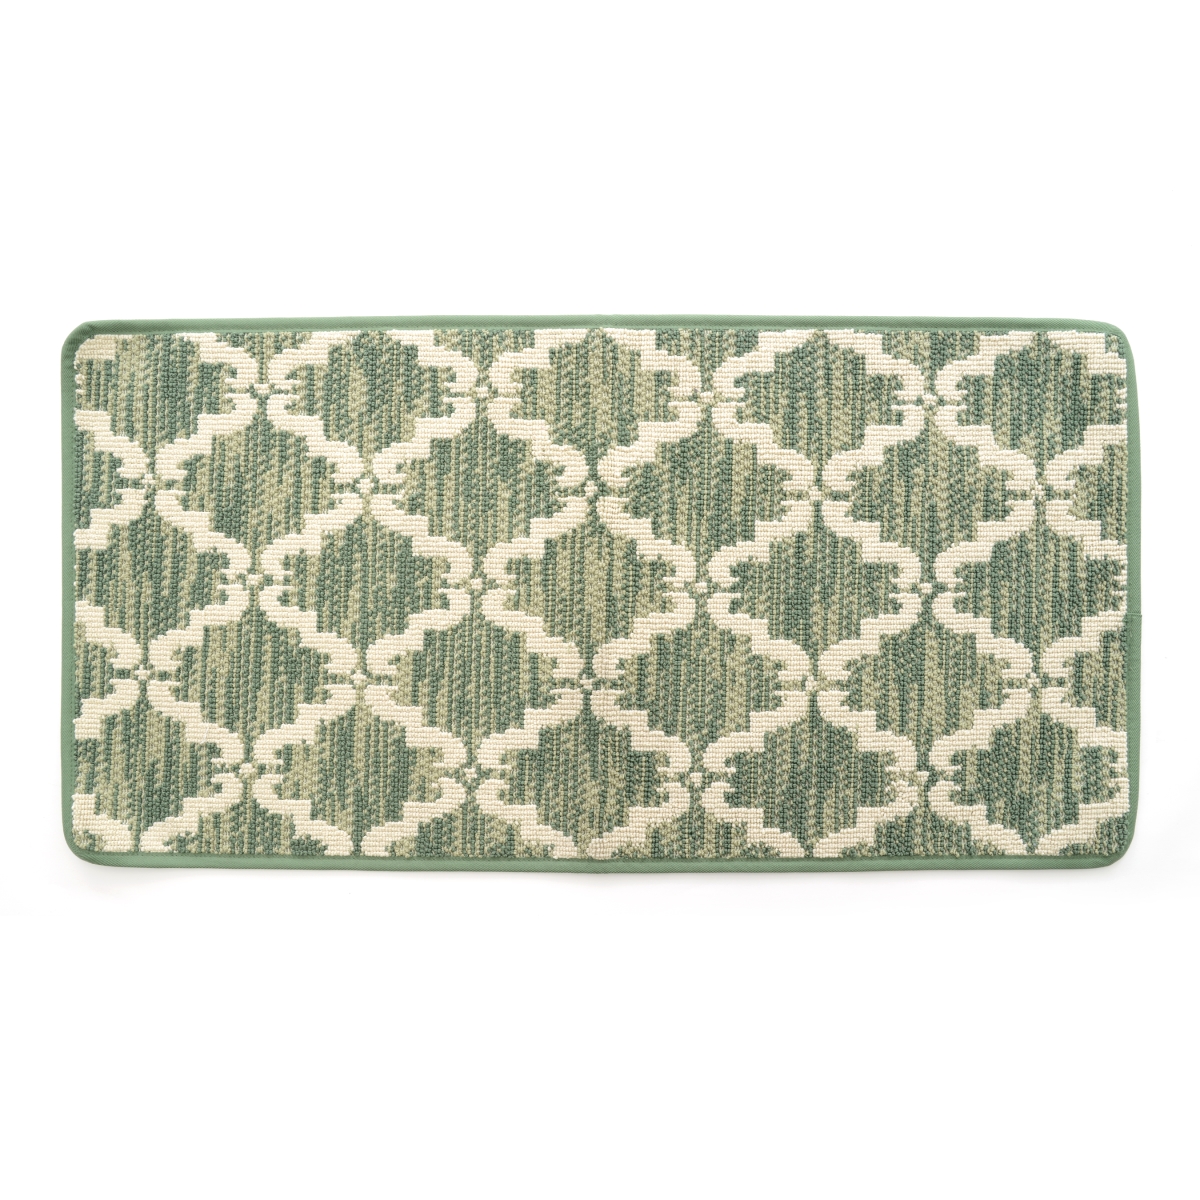 20 X 39 In. Ultra Plush Pacific Knitted Loop Pile Polyester Bath Mat - Green